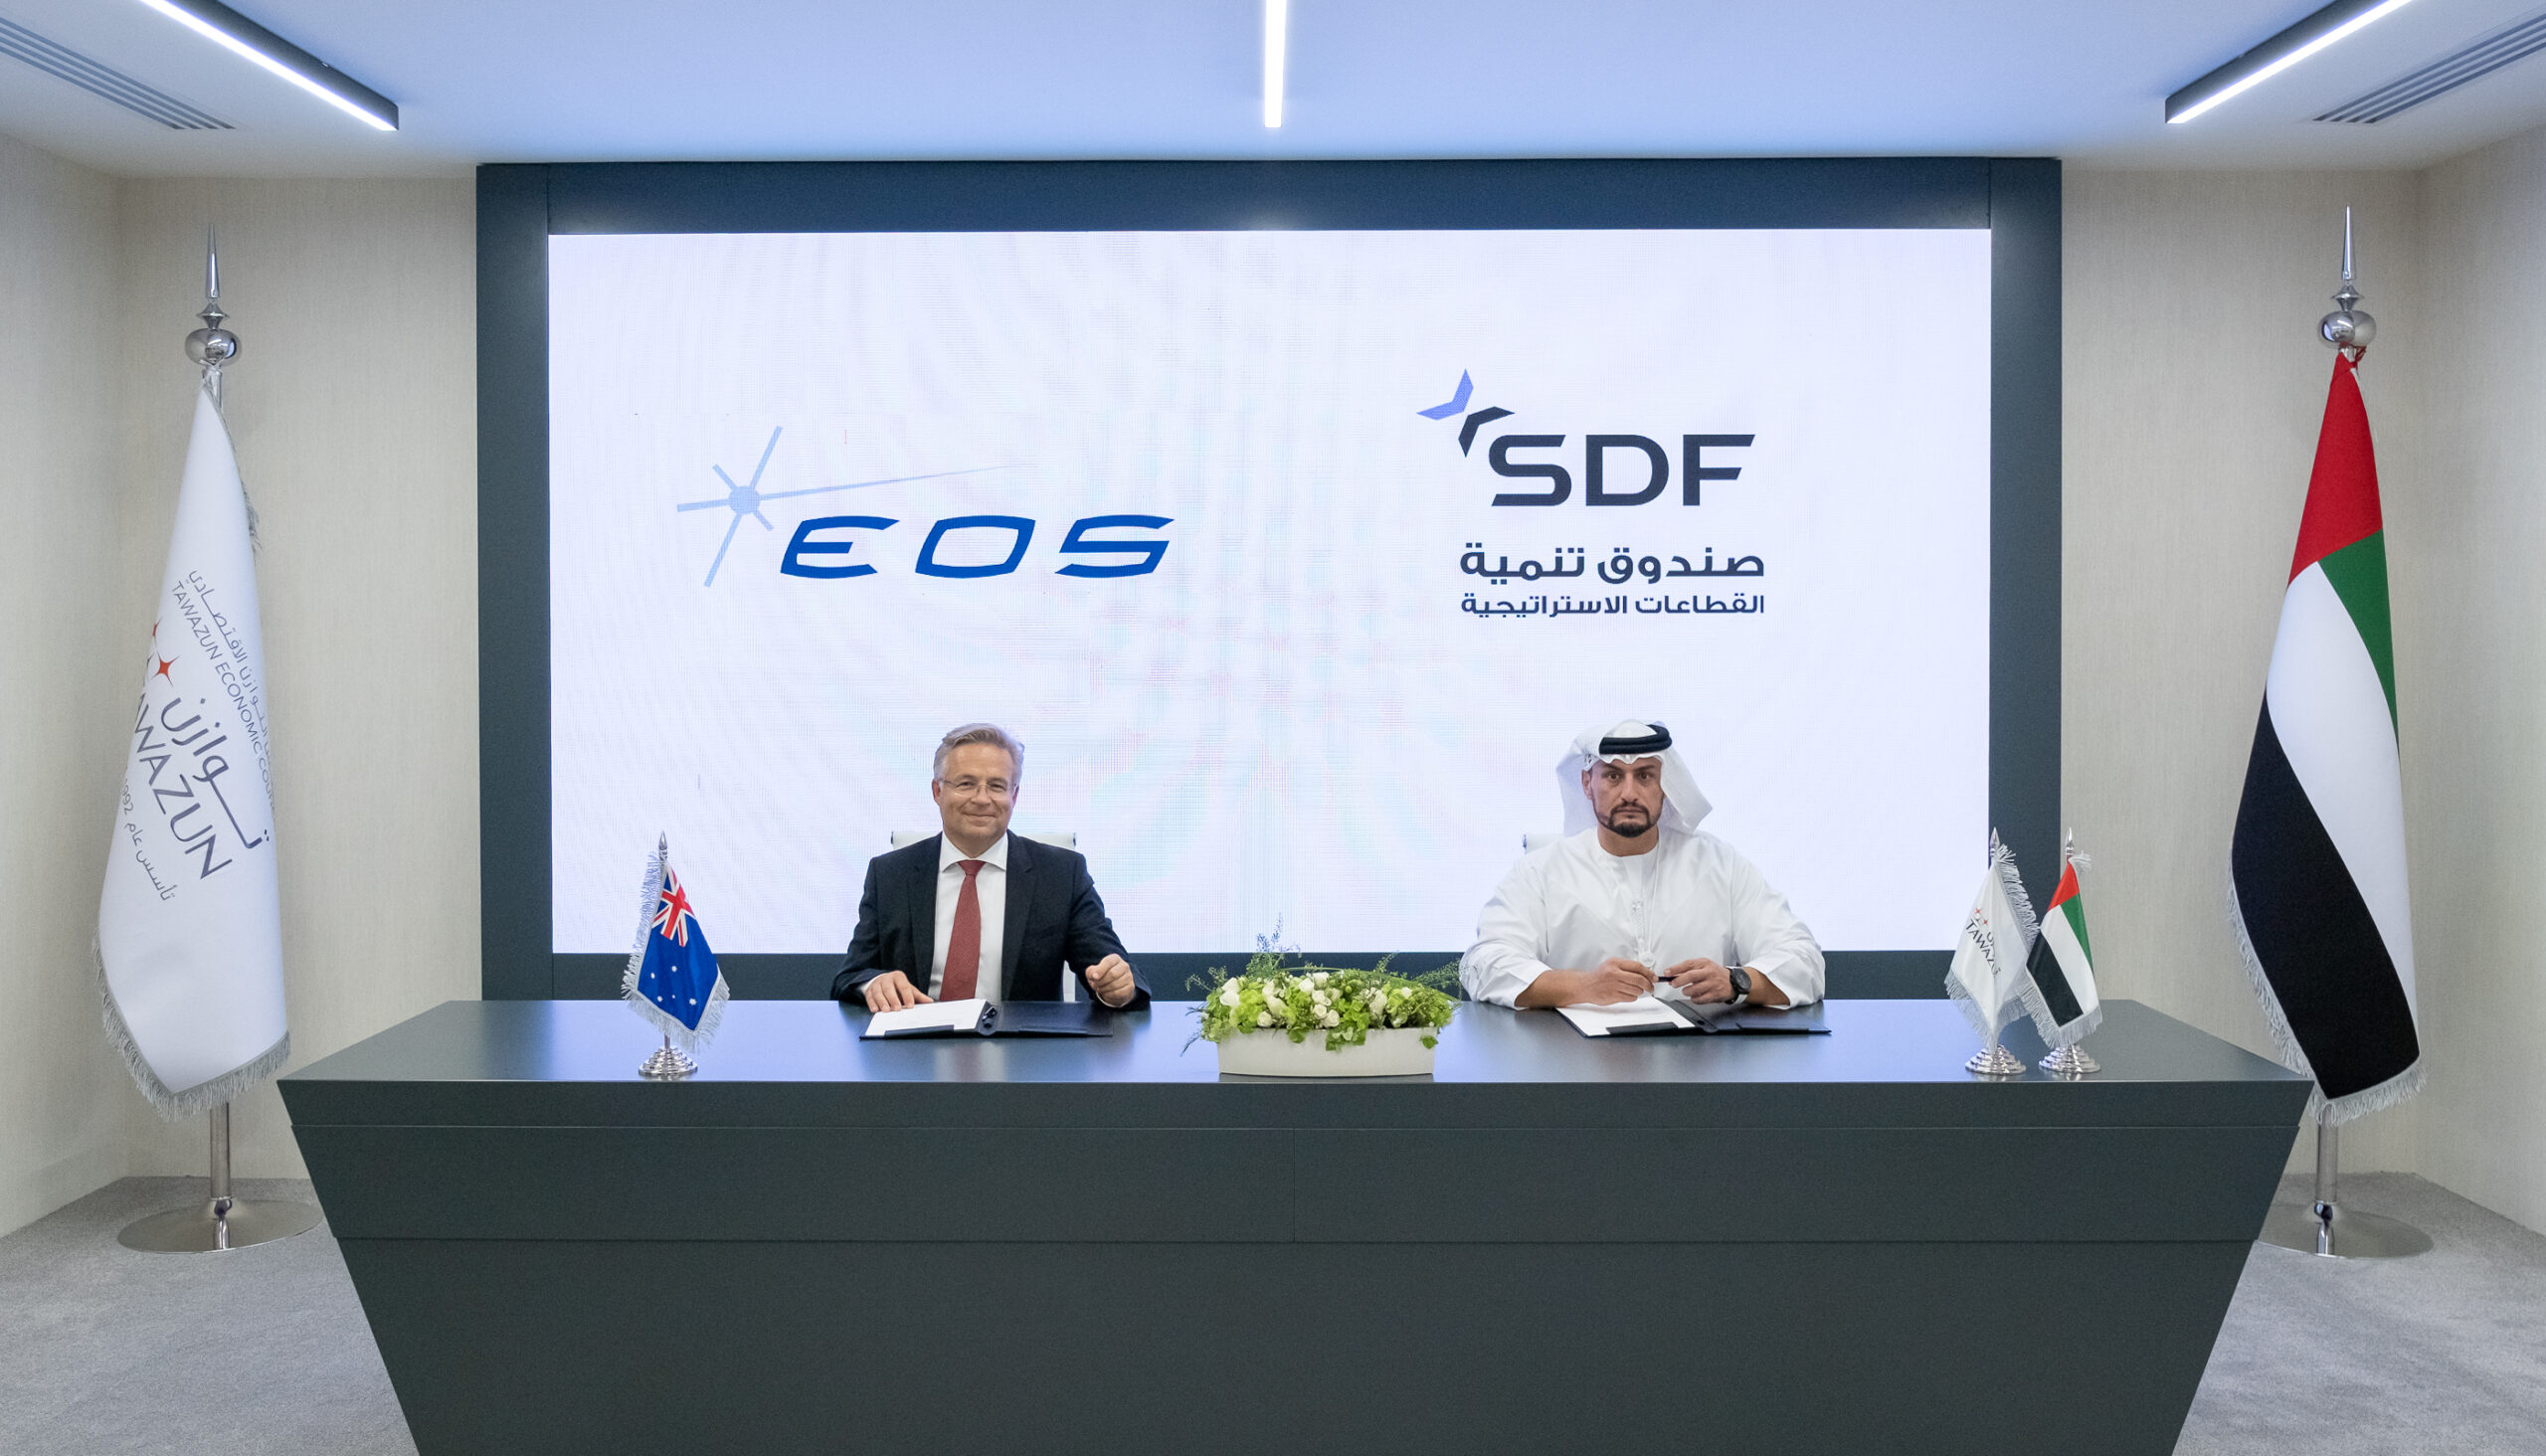 SDF and EOS form a partnership to develop a cutting-edge Multi-Platform, Light-Weight, 14.5 x 114 mm weapon system